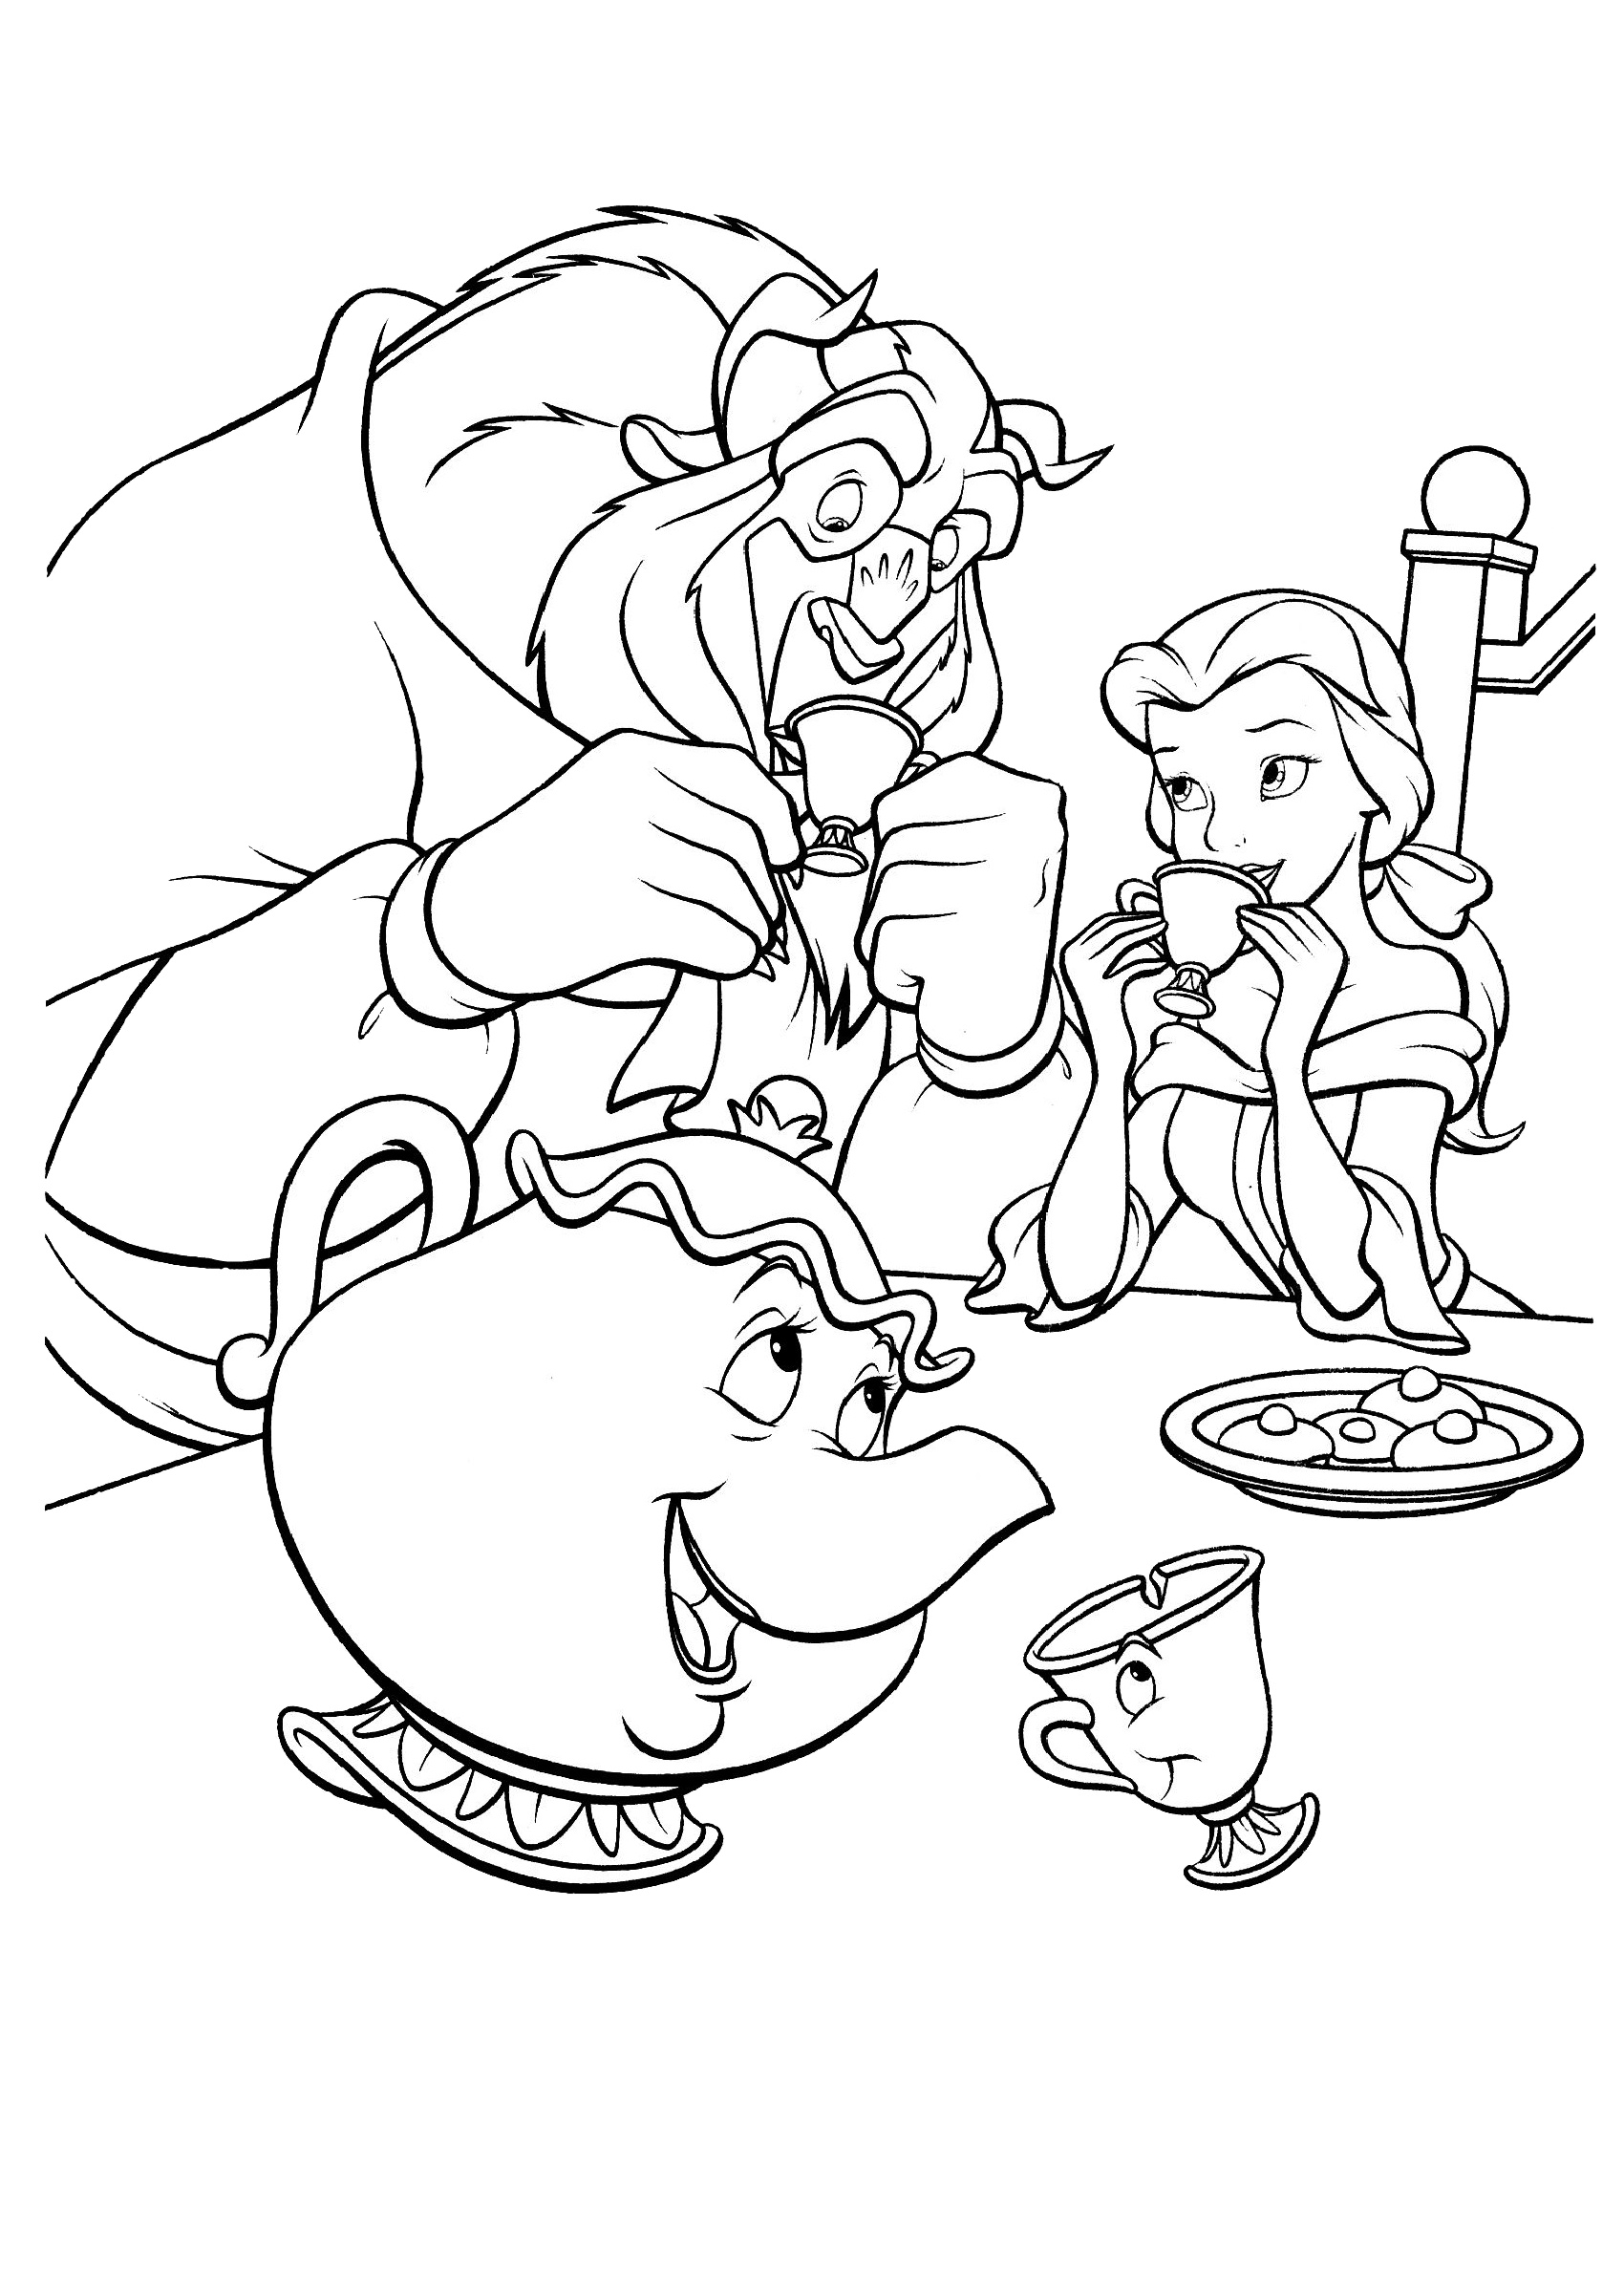 Coloring Pages Disney Princess Belle Coloring Pages For Kids